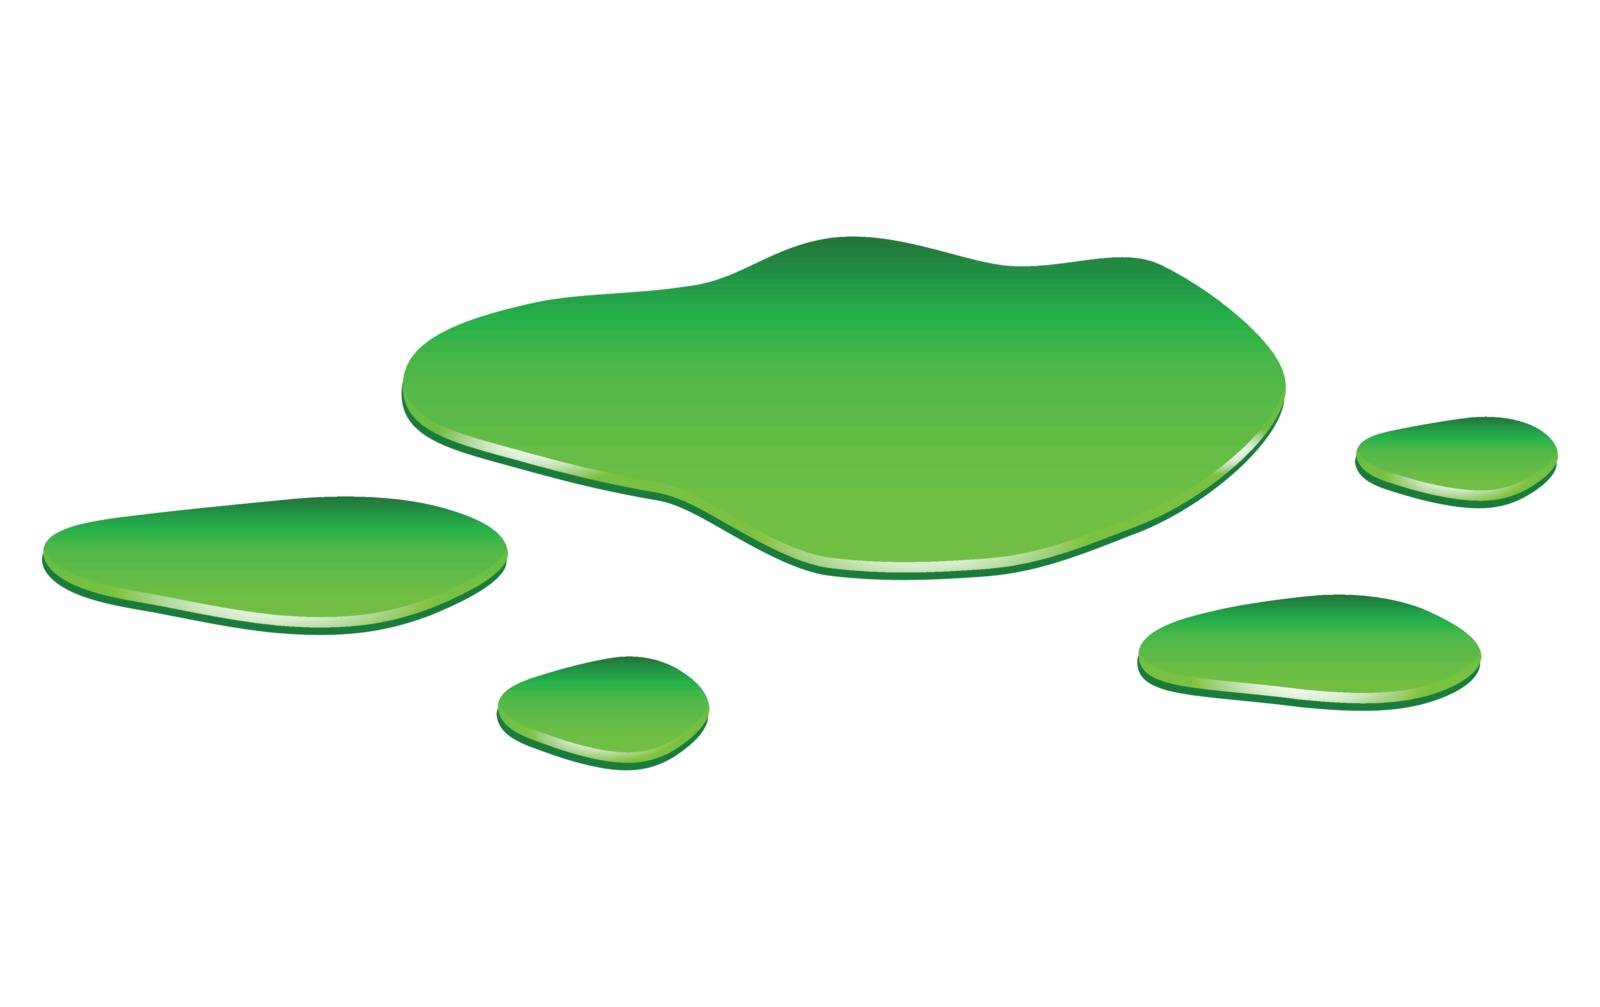 Puddle of toxic substance spill. Green chemical stain, plash, drop. Vector illustration isolated on the white background